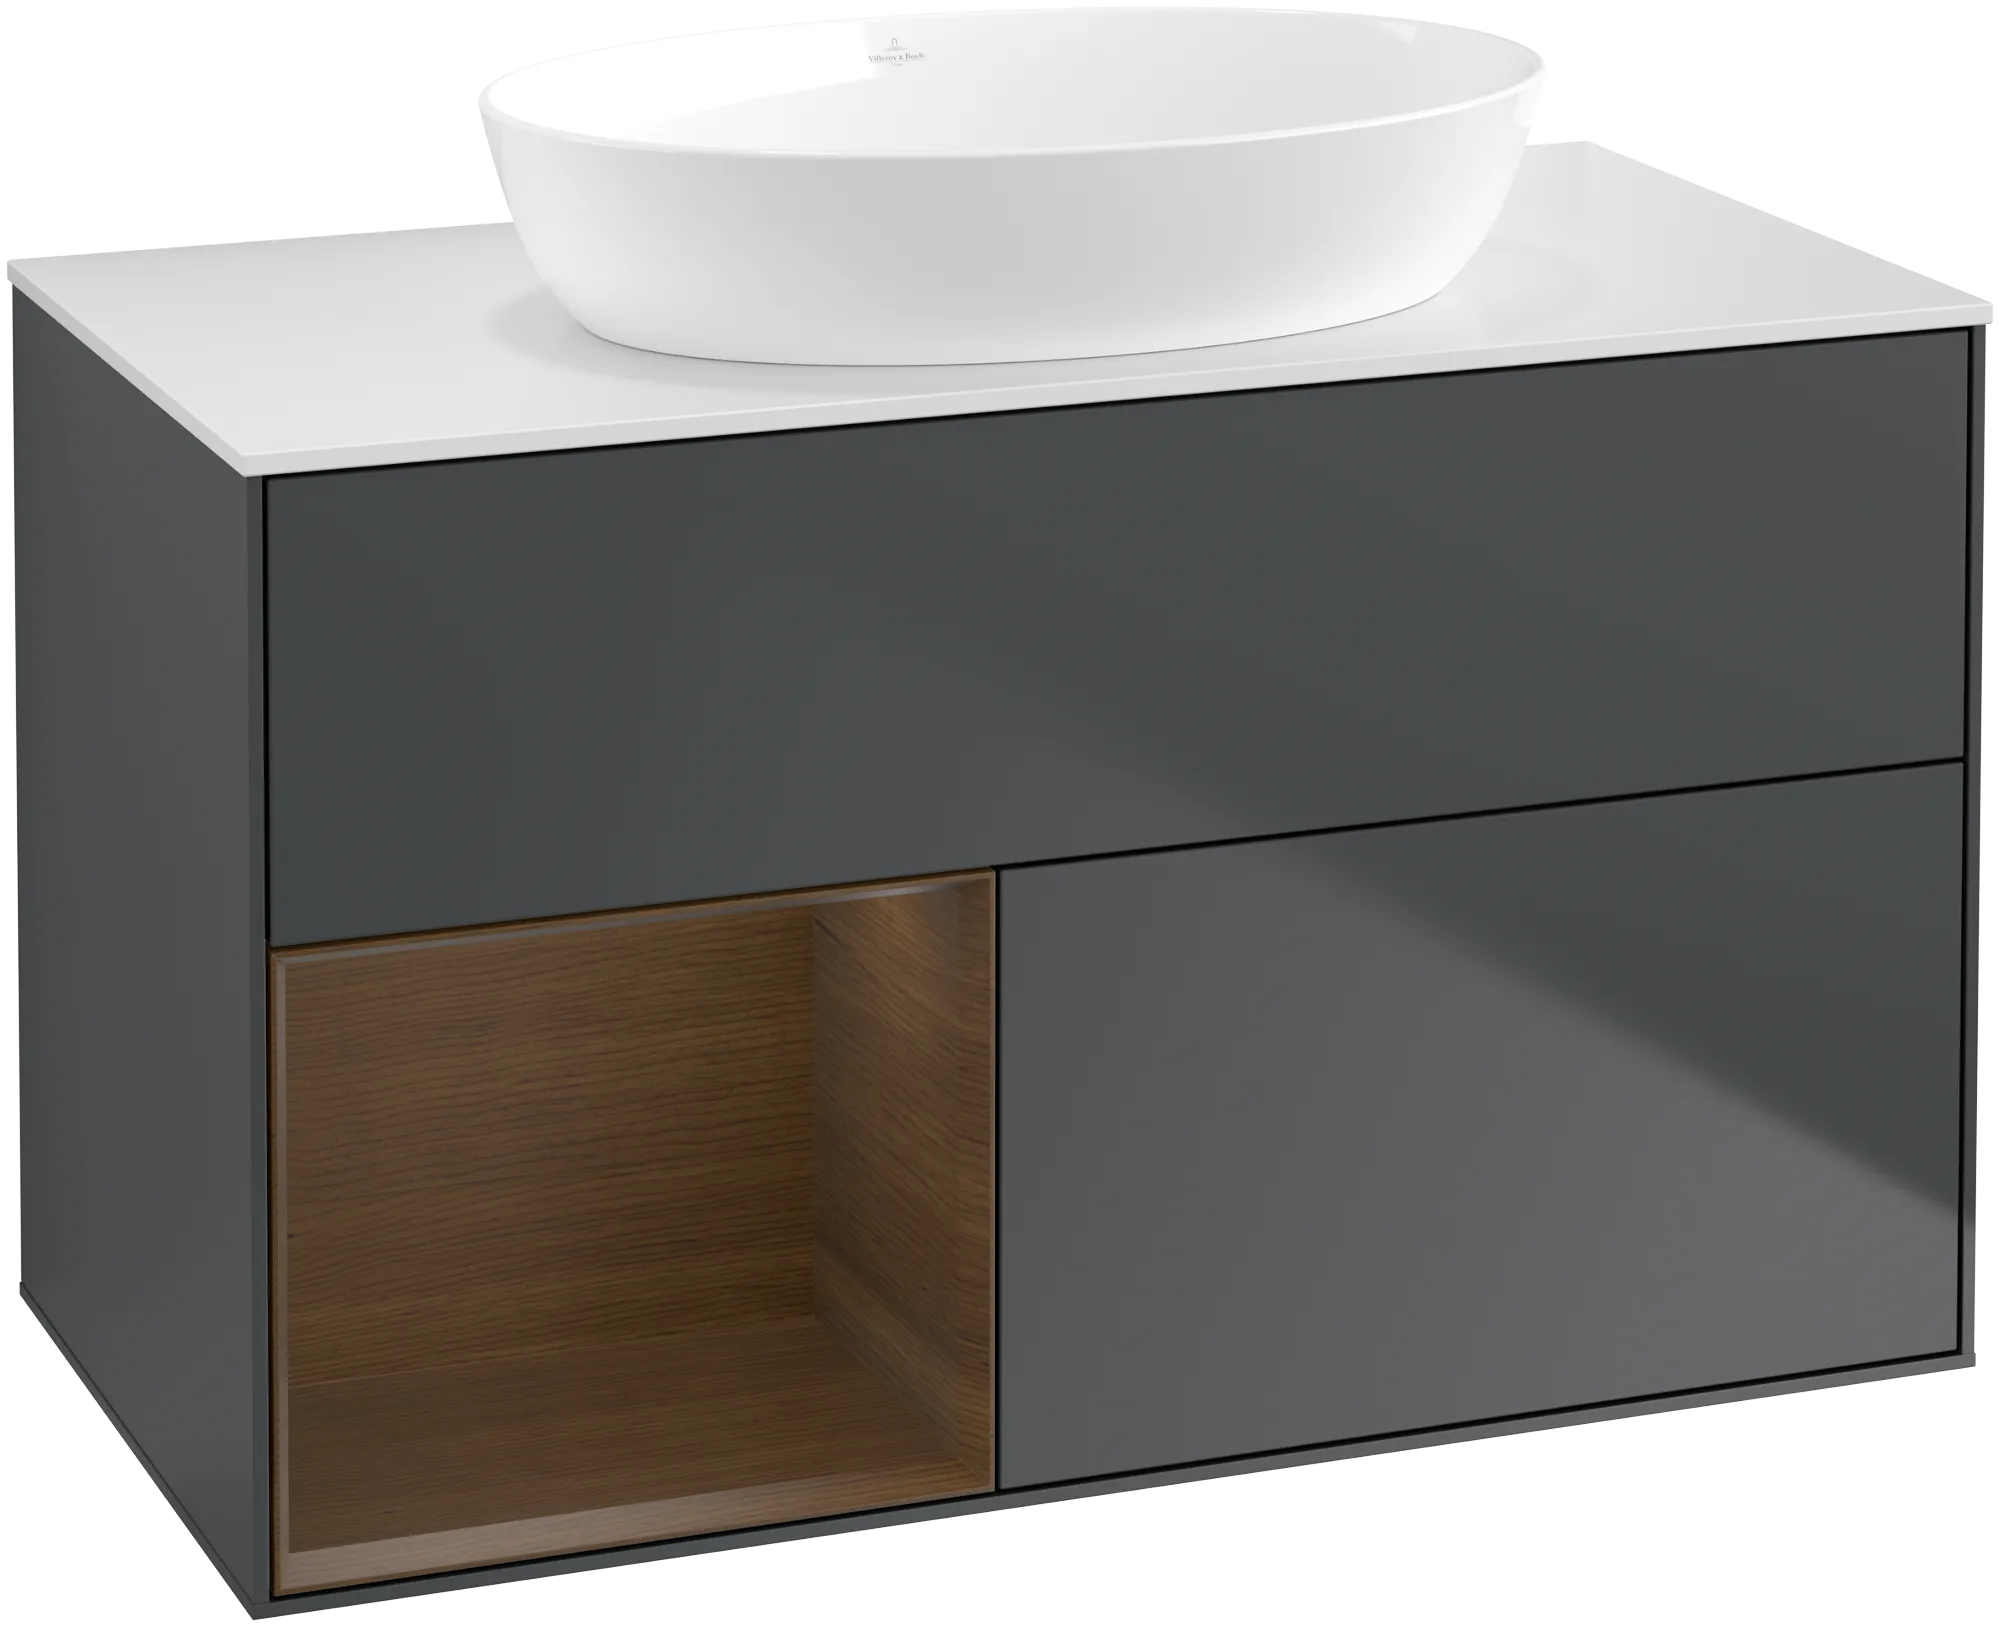 Picture of VILLEROY BOCH Finion Vanity unit, with lighting, 2 pull-out compartments, 1000 x 603 x 501 mm, Midnight Blue Matt Lacquer / Walnut Veneer / Glass White Matt #GA11GNHG